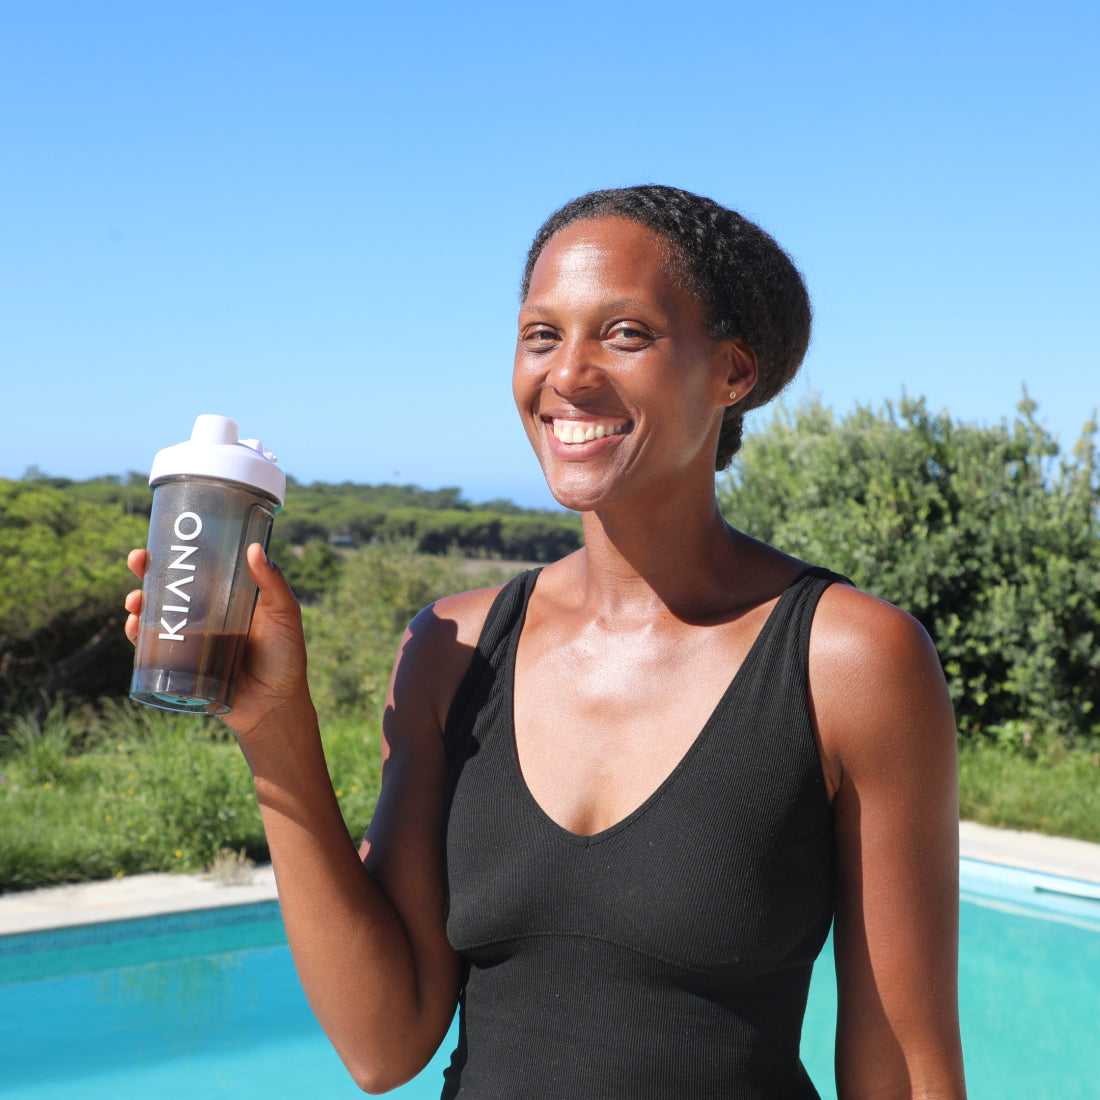 Fuel Your Fitness Goals with KIANO's Nutritious Chocolate Meal Replacement